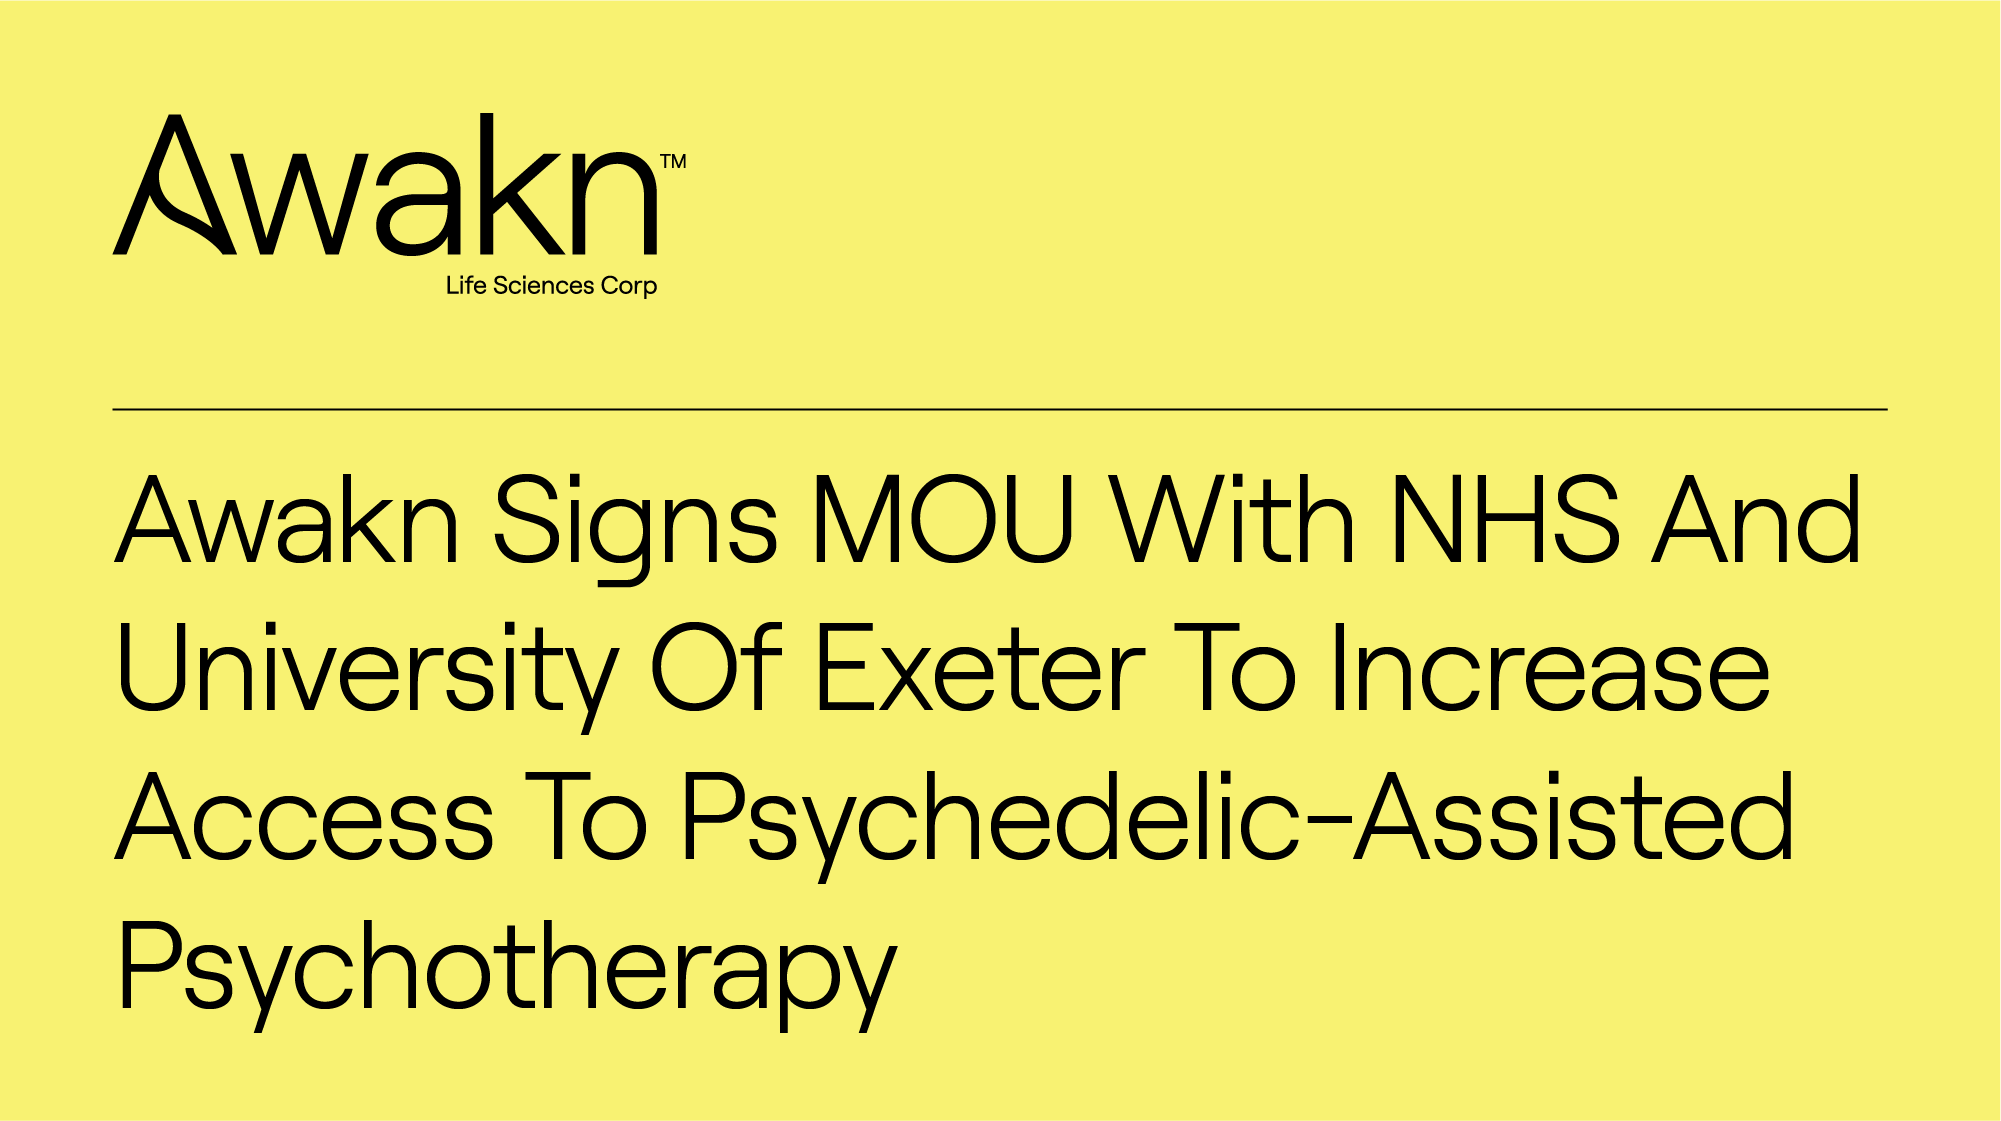 Awakn Signs MOU With NHS And University Of Exeter To Increase Access To Psychedelic-Assisted Psychotherapy